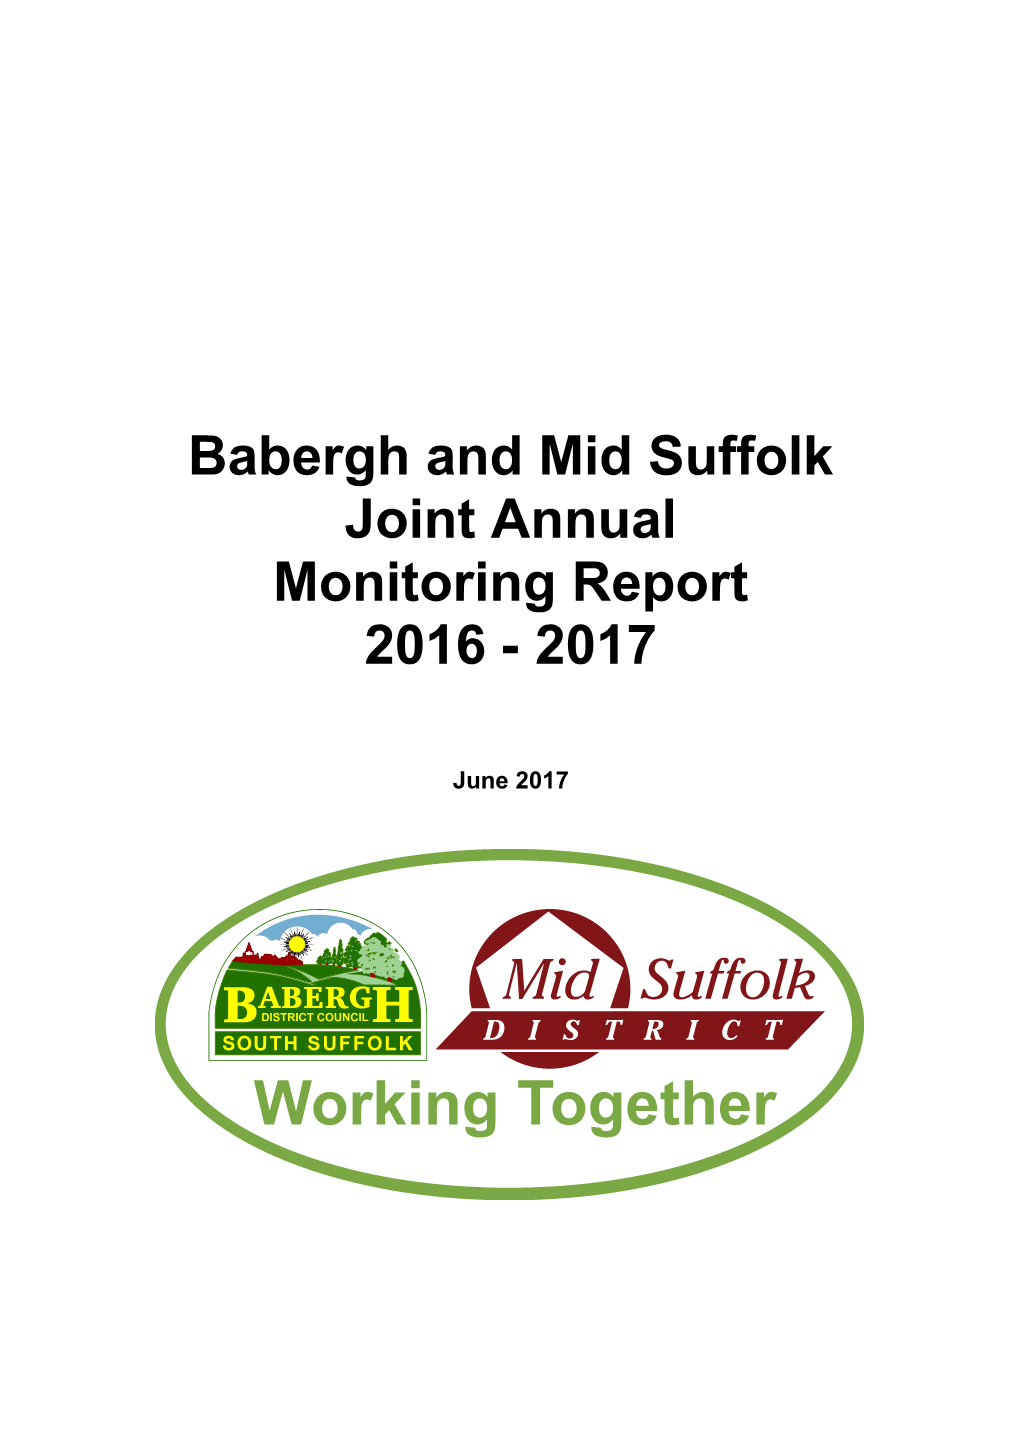 BMSDC Annual Monitoring Report